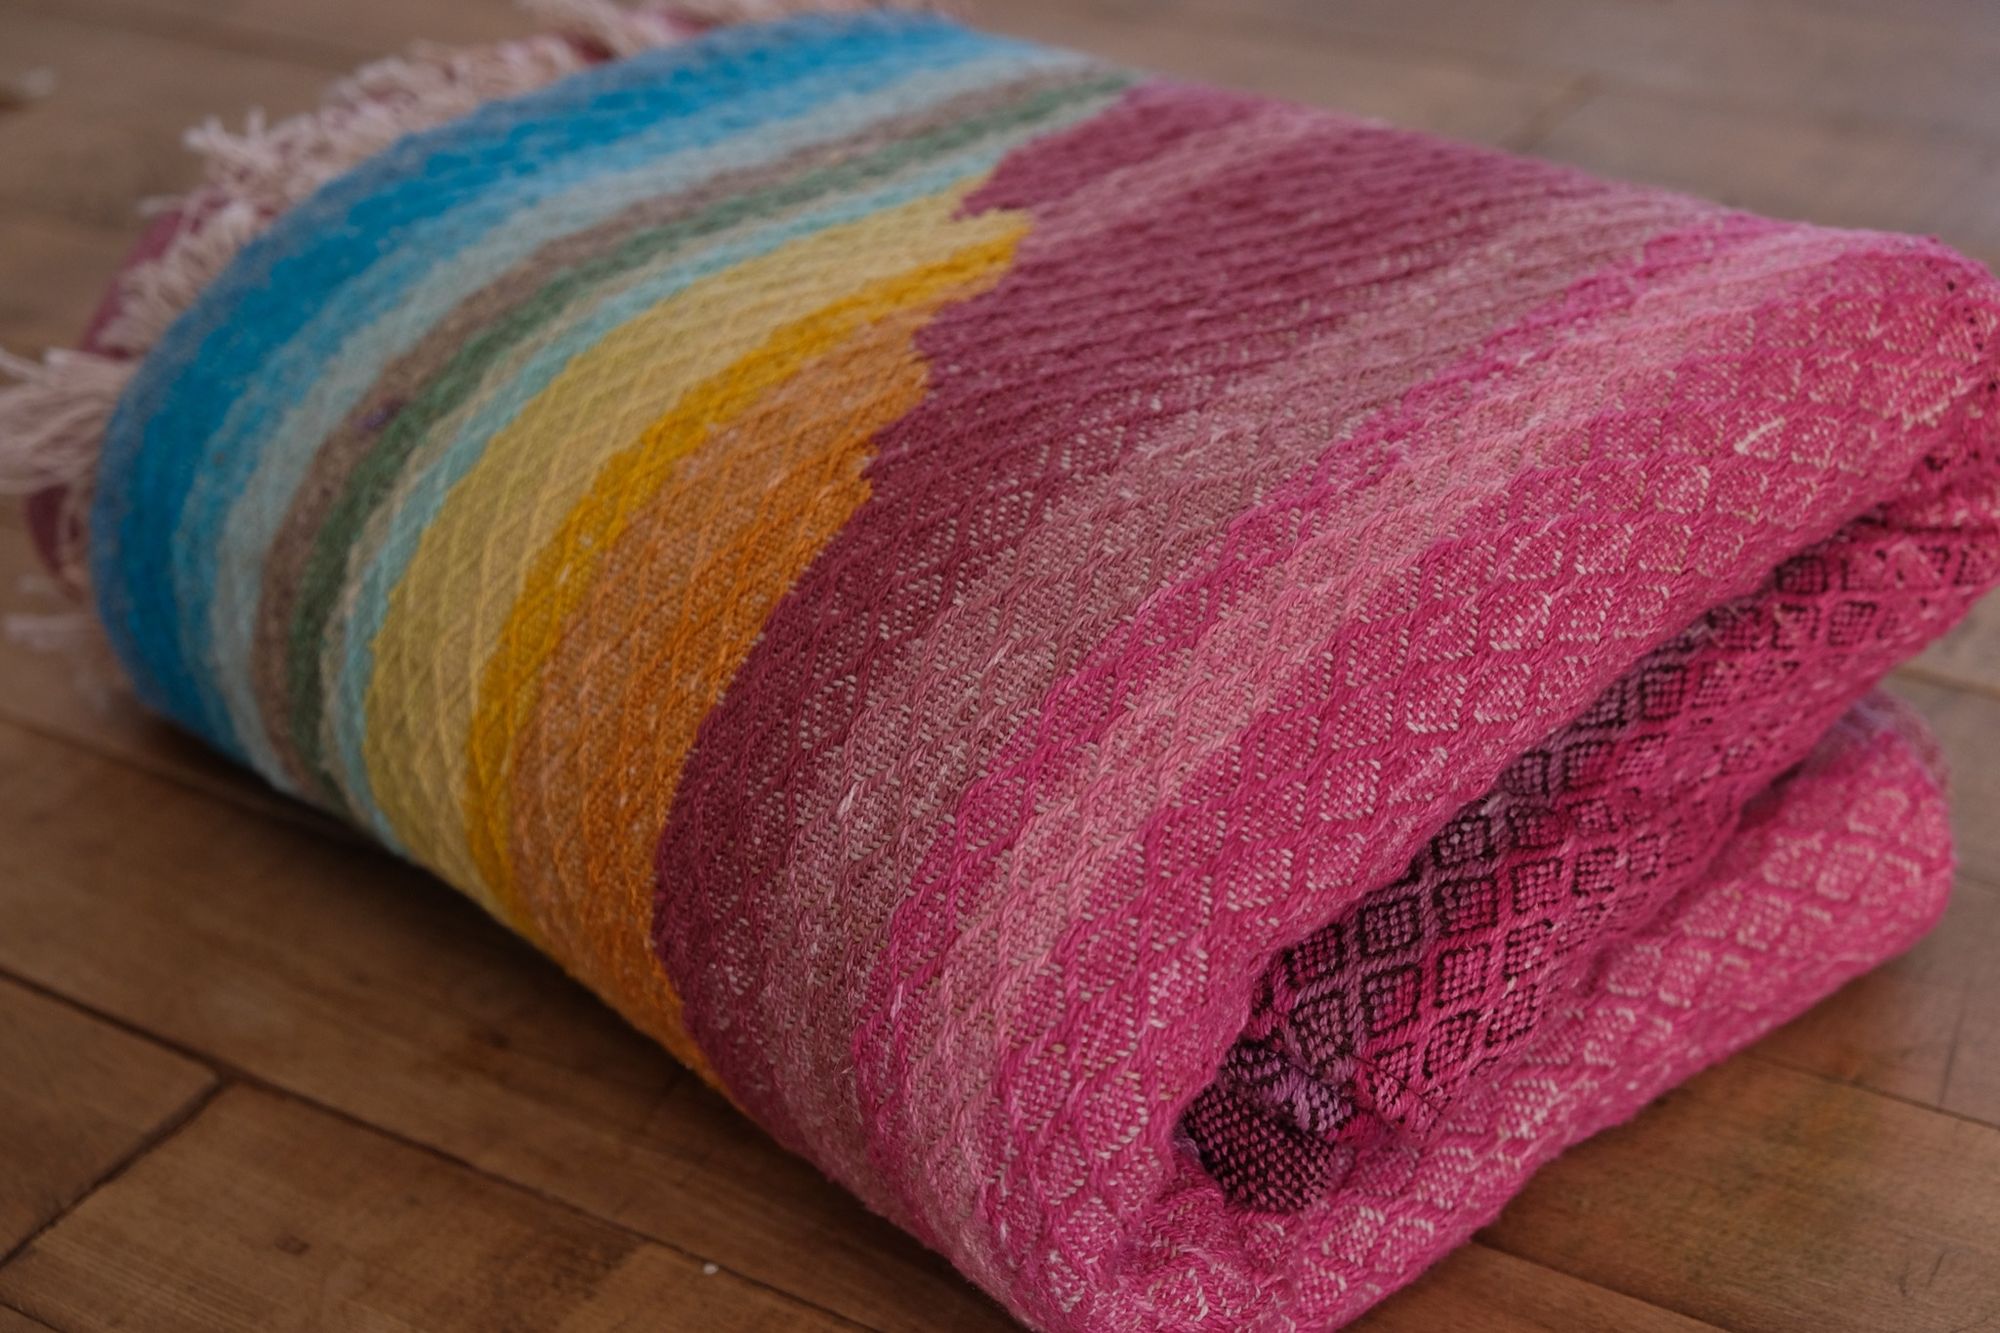 Brightly colored fabric in pink, yellow, orange, blue, cream, green and purple is folded on a wooden floor